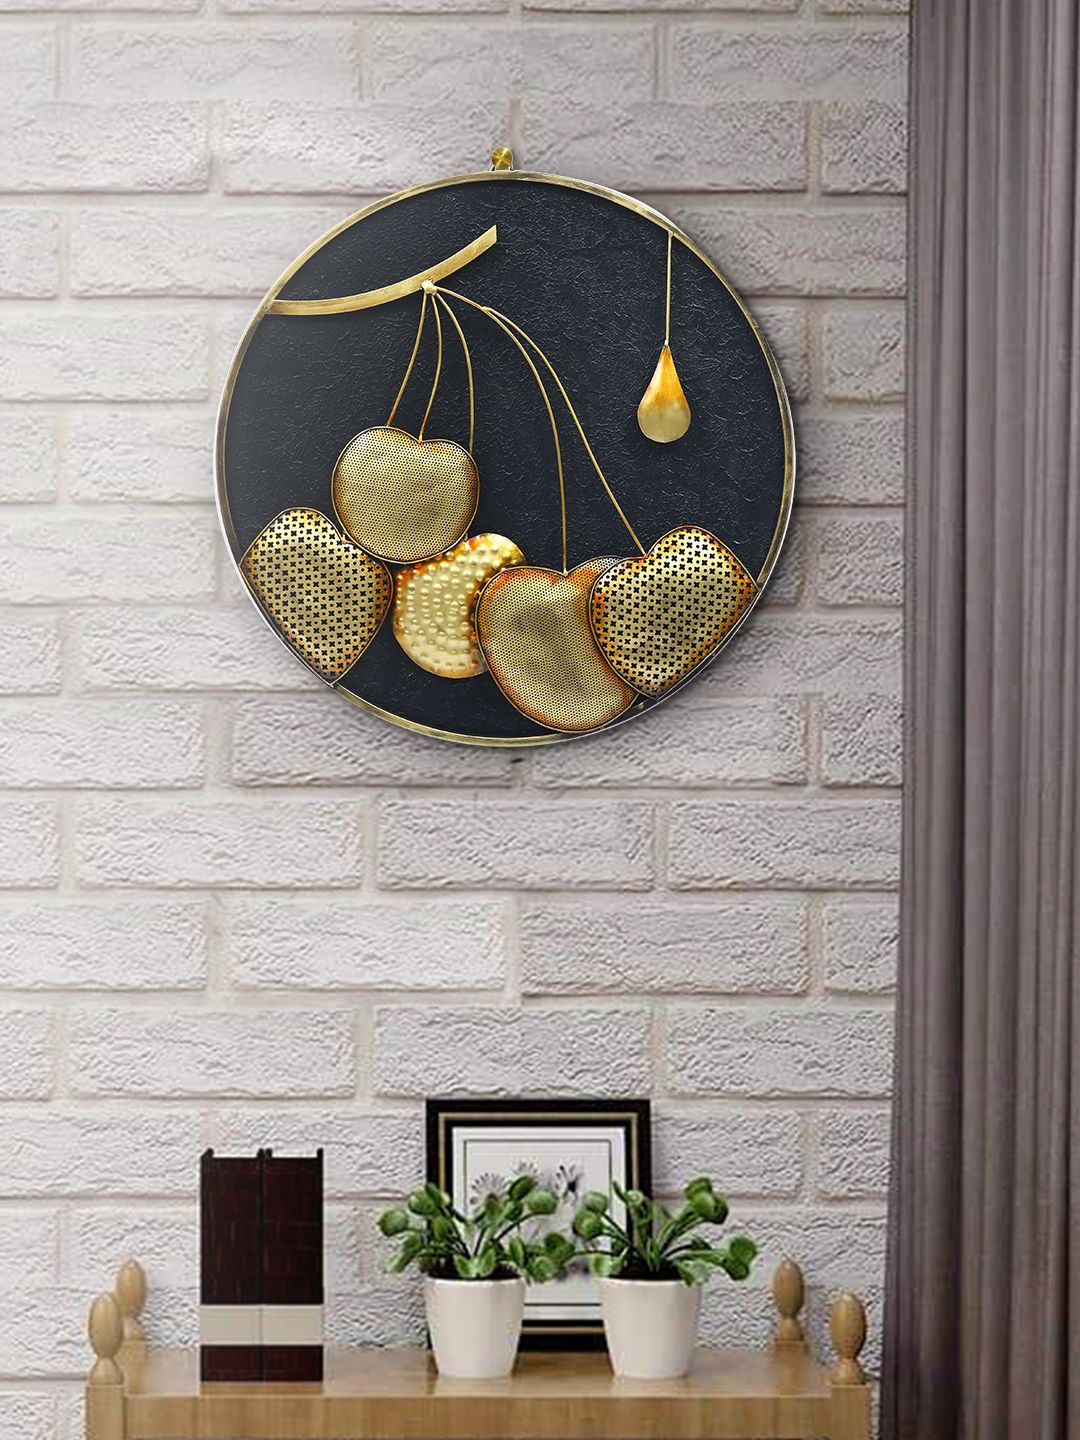 Aapno Rajasthan Gold-Toned & Black Vibrant & Picturesque Wall Decor Price in India